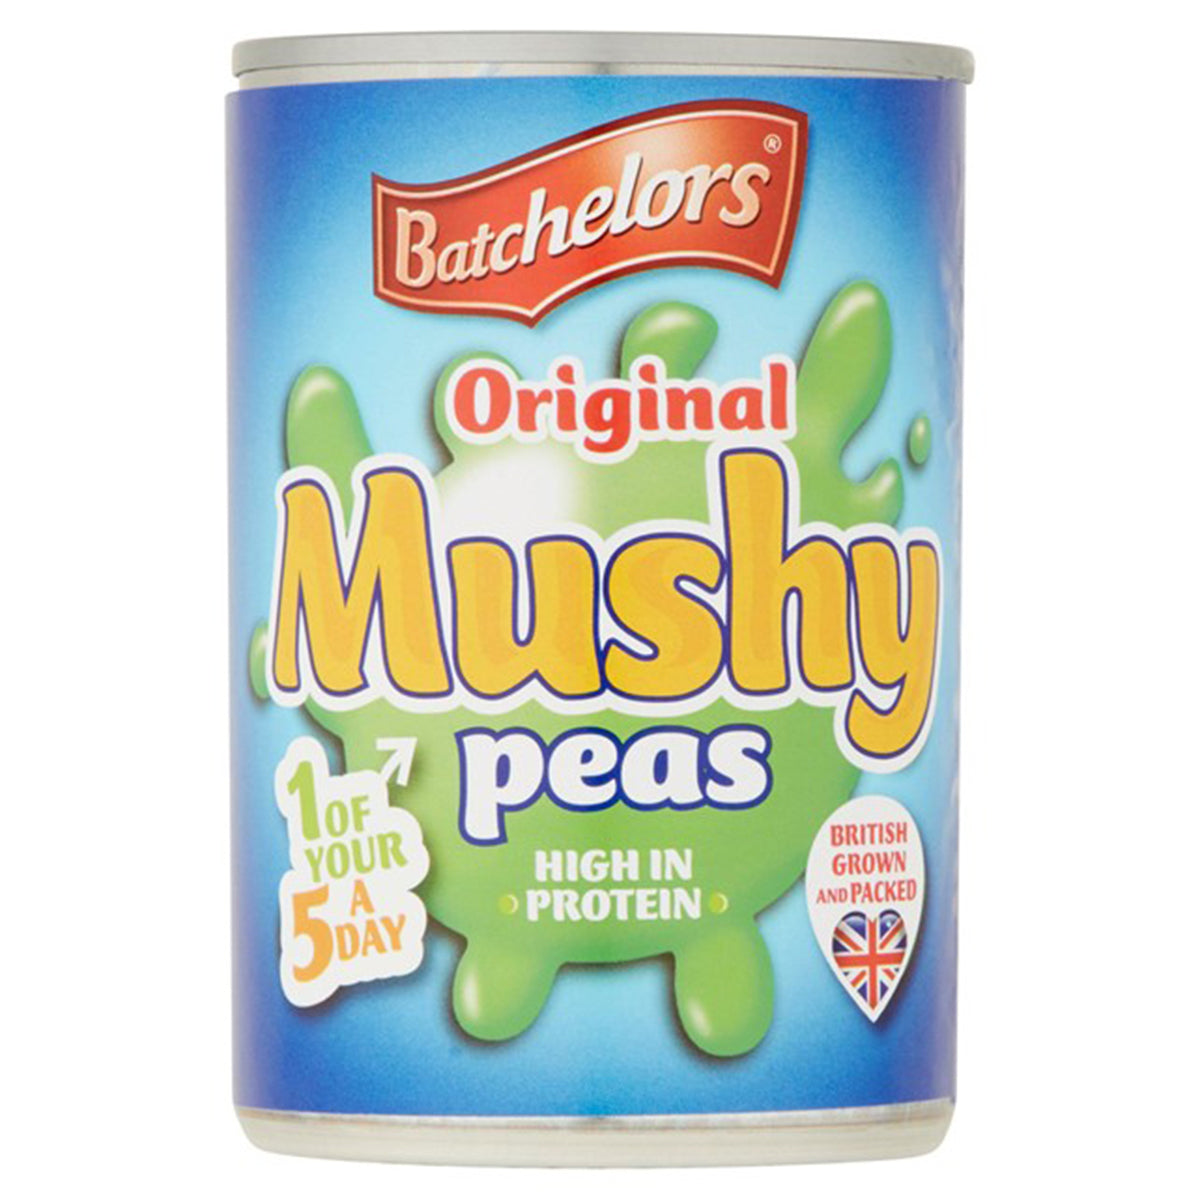 A can of Batchelors - Original Mushy Peas - 300g on a white background.